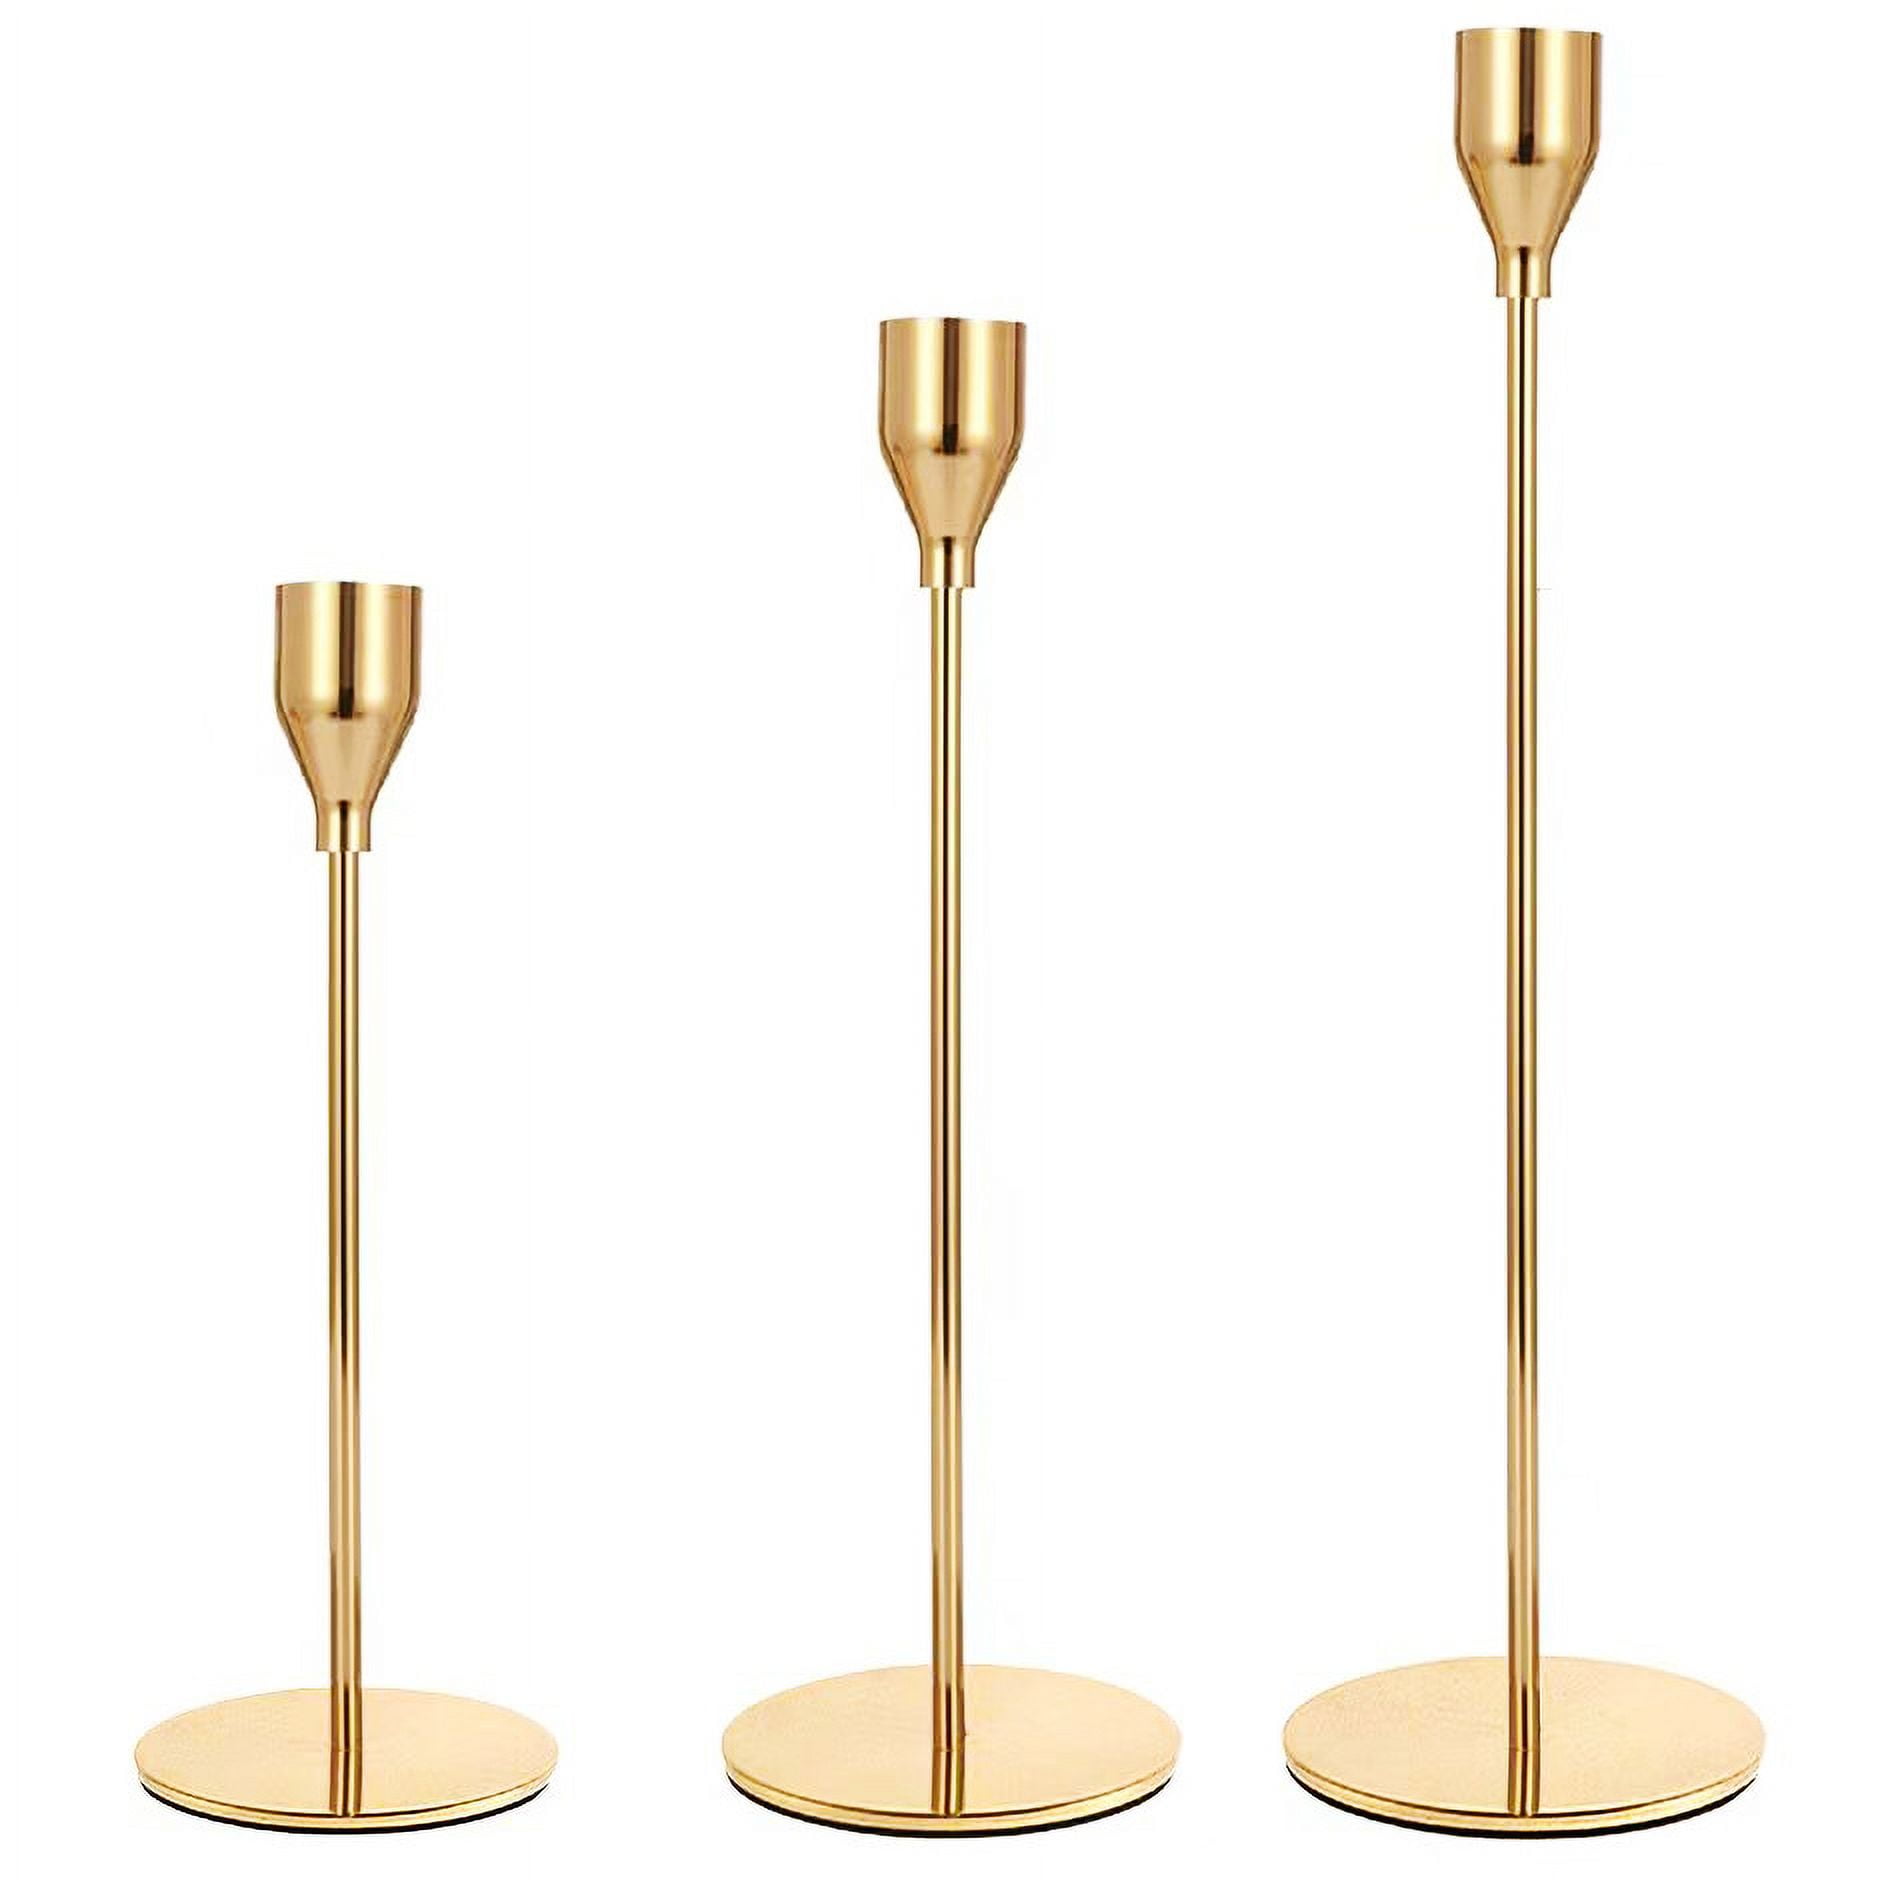 Antique Brass Iron Taper Candle Holder - Set of 3 Decorative Candle Stand,  Candlestick Holder for Wedding, Dinning, Party